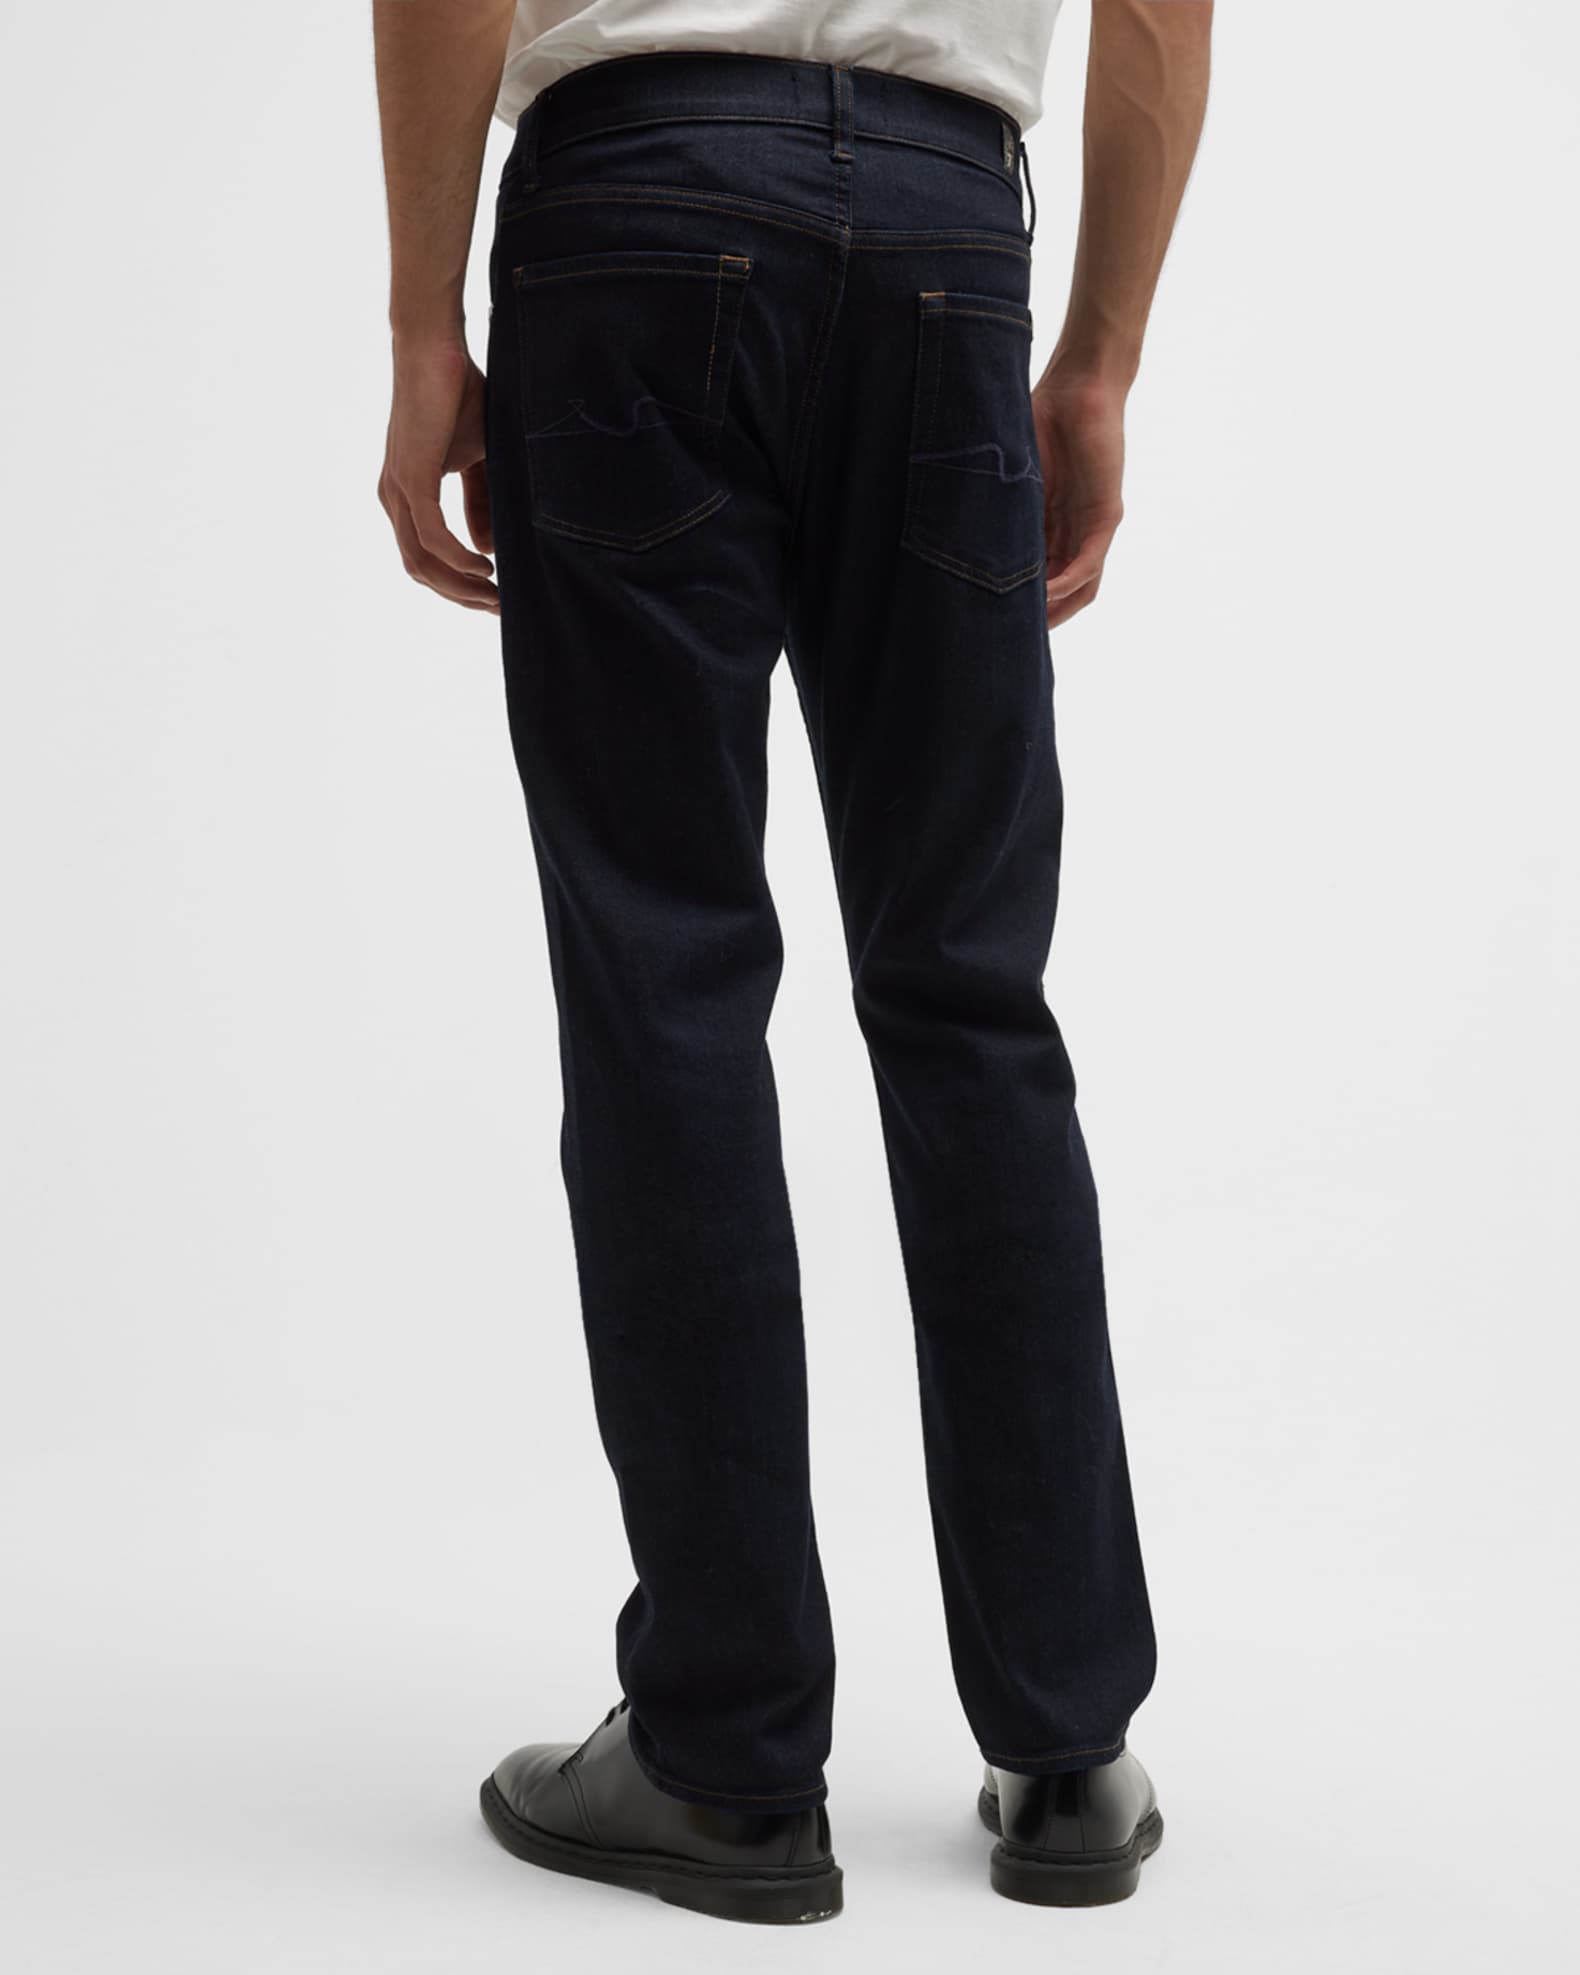 7 for all mankind Men's Luxe Performance Straight-Leg Jeans | Neiman Marcus